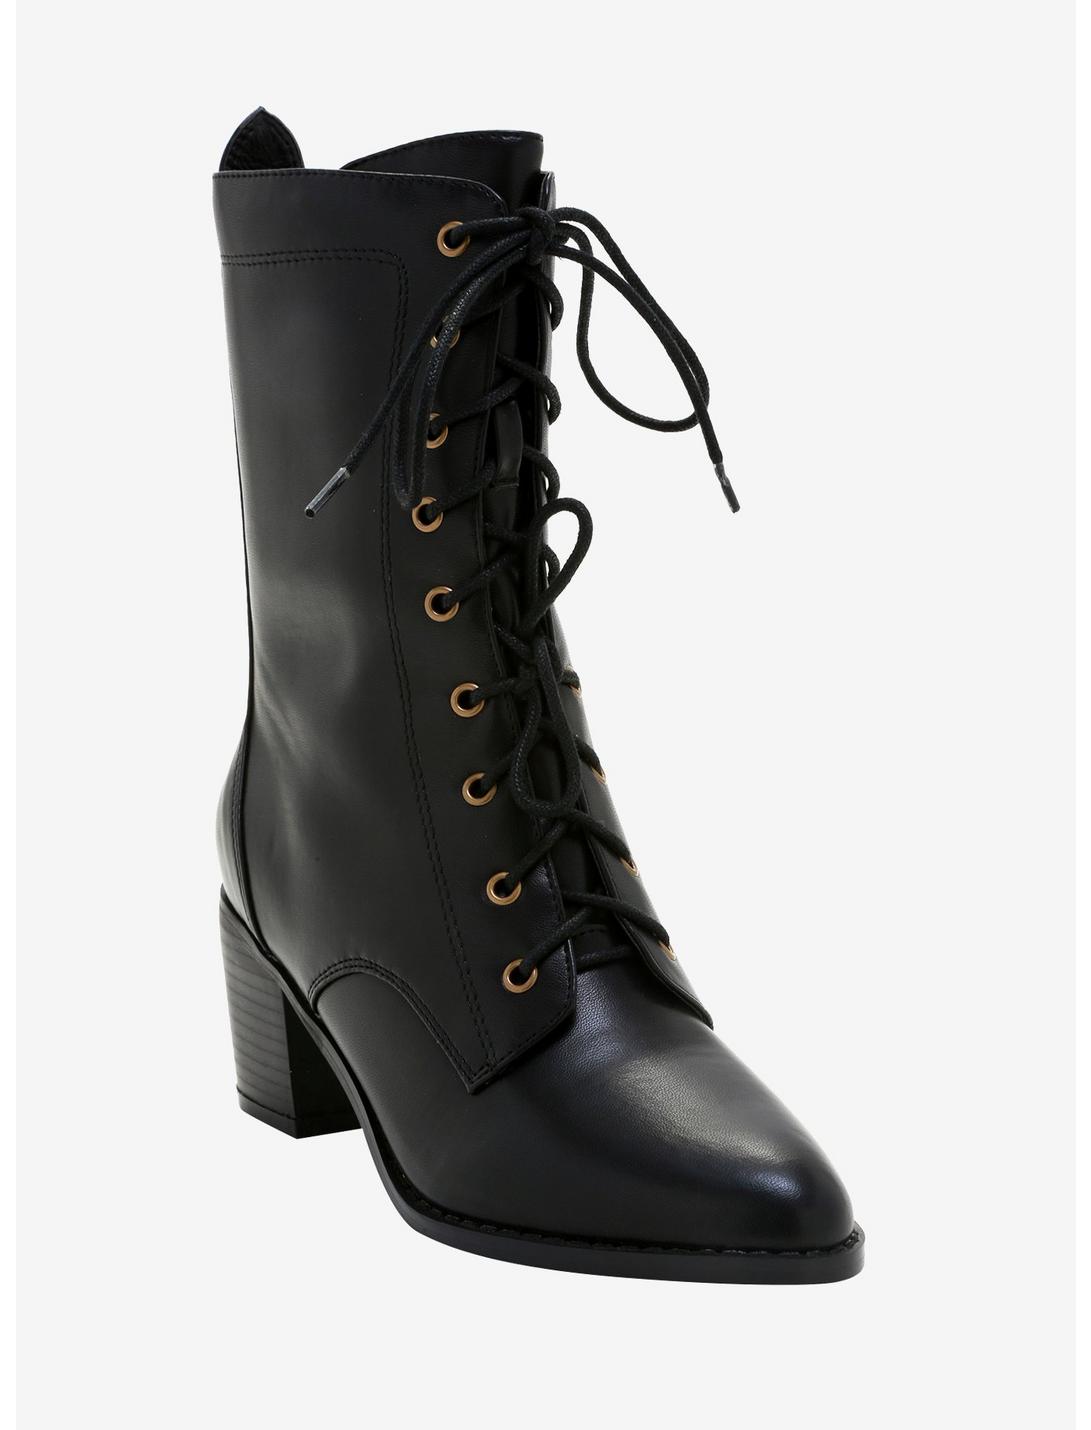 Spellbound Witch Pointed Lace-Up Boots, BLACK, hi-res